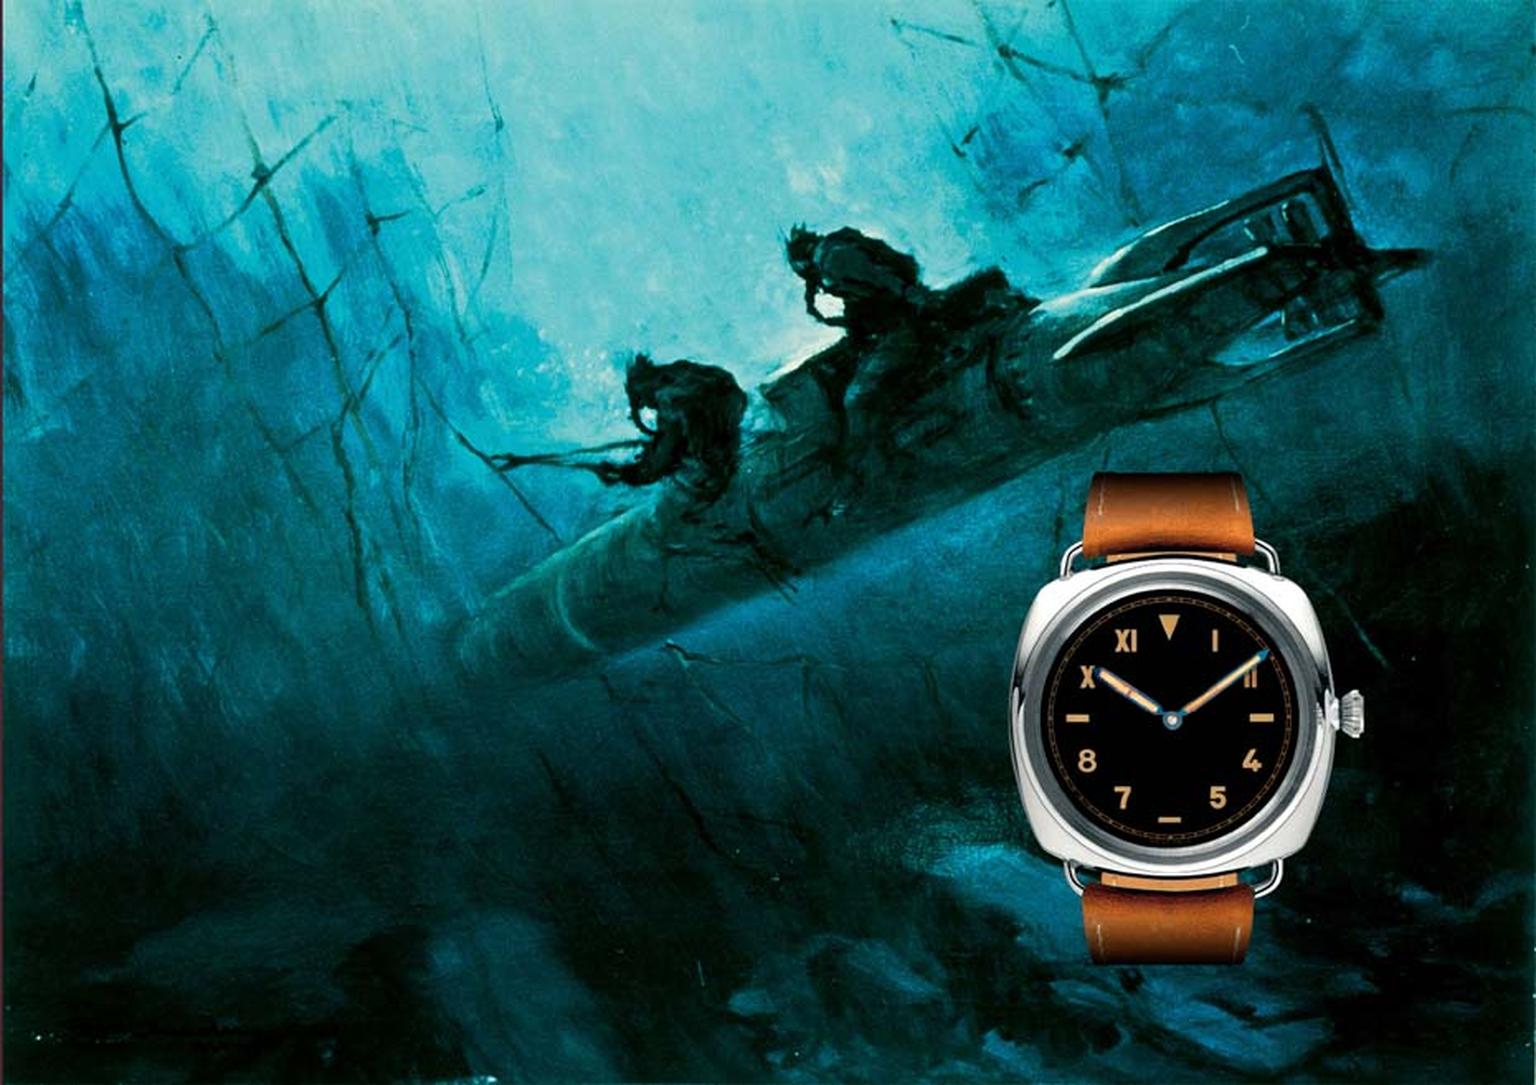 Panerai was the top secret purveyor to Italy's Royal Navy of precision underwater instruments that glowed in the dark. Covert stealth operations included the 1941 Raid on Alexandria in which frogmen mounted on their submersible torpedoes placed limpet min